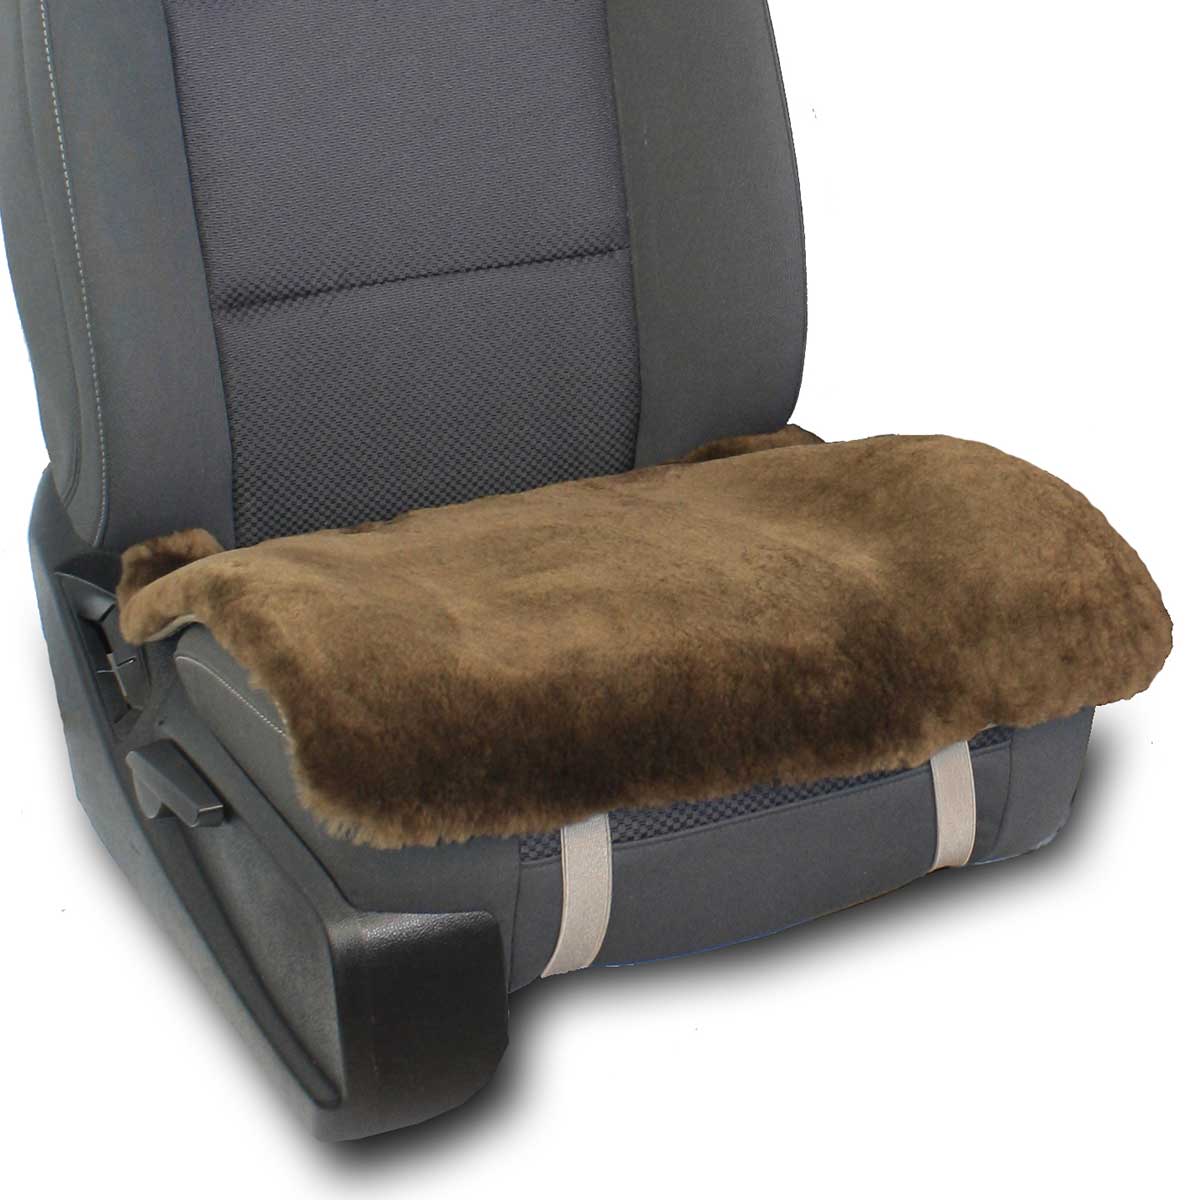 https://autohq.com/images/products/superlamb_seat-pad_coffee.jpg